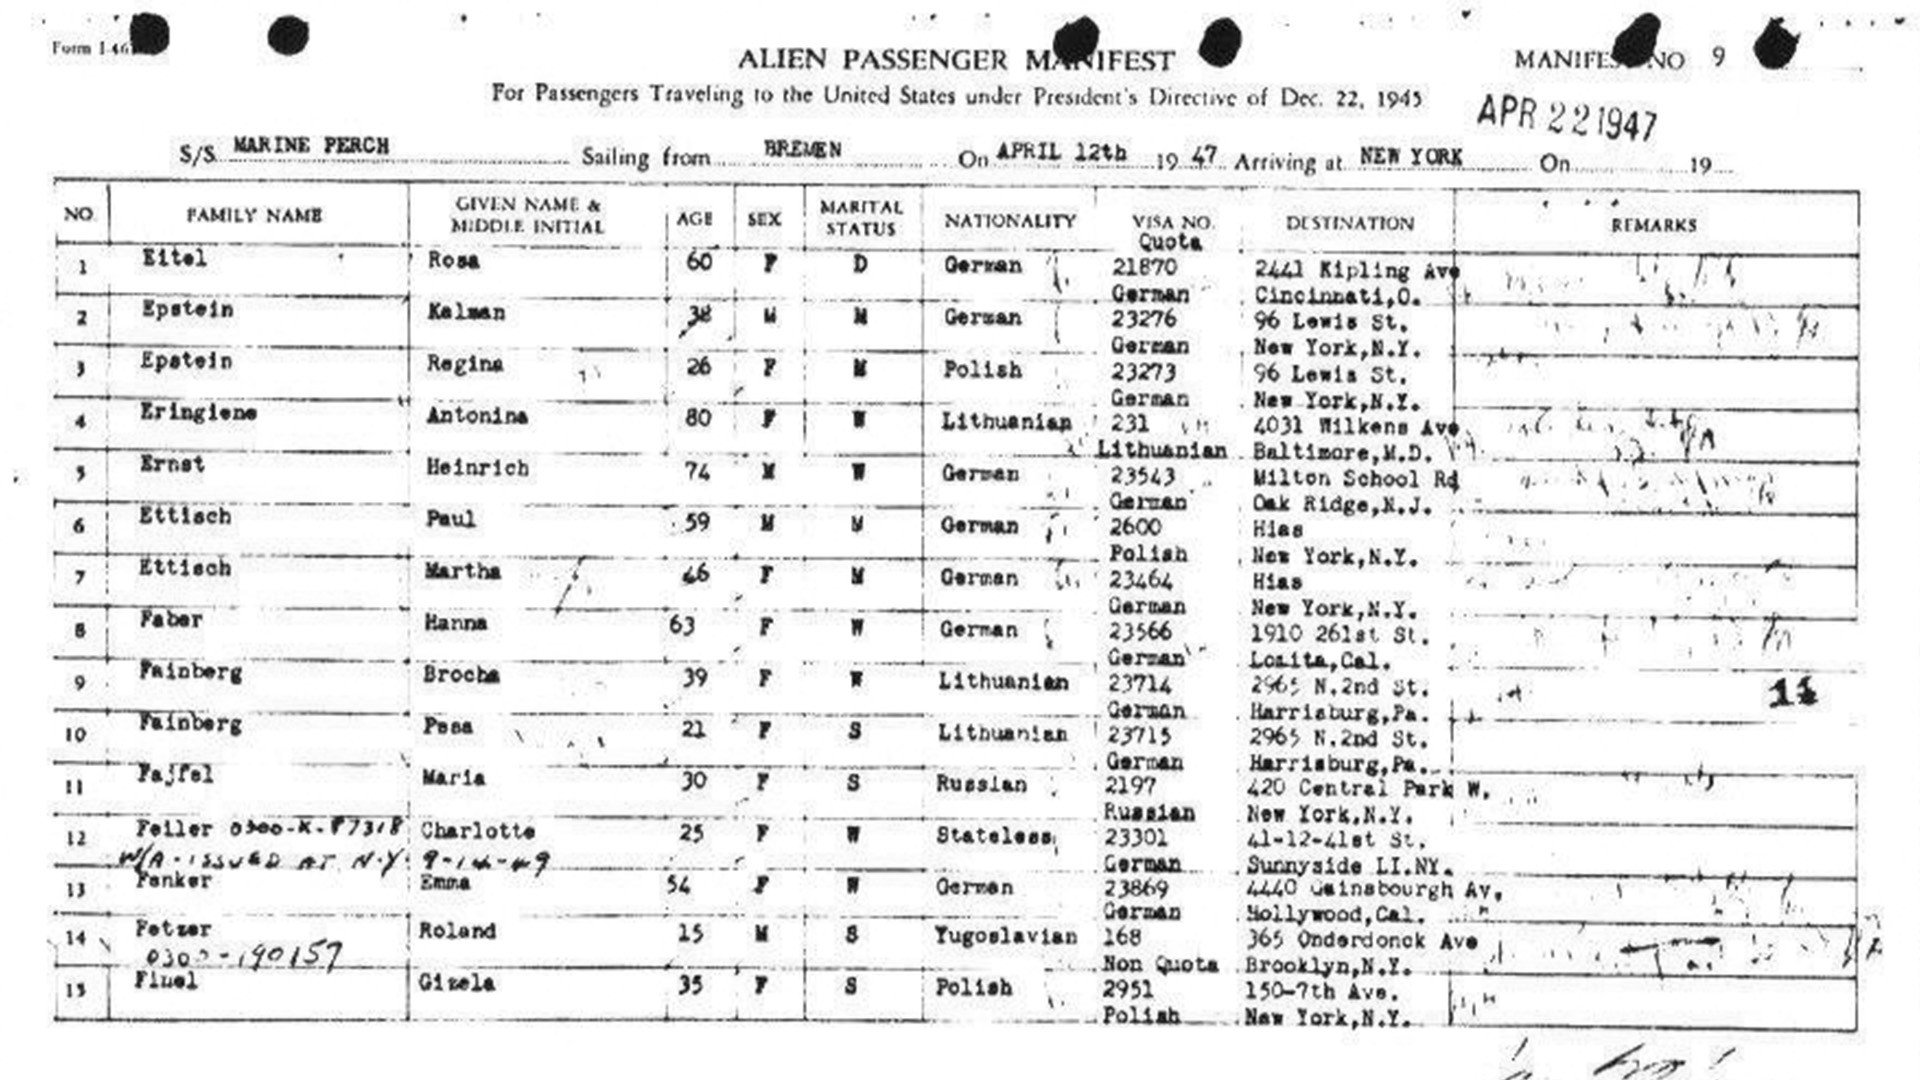 Ship manifest from the S.S. Marine Perch, April 12th 1947.